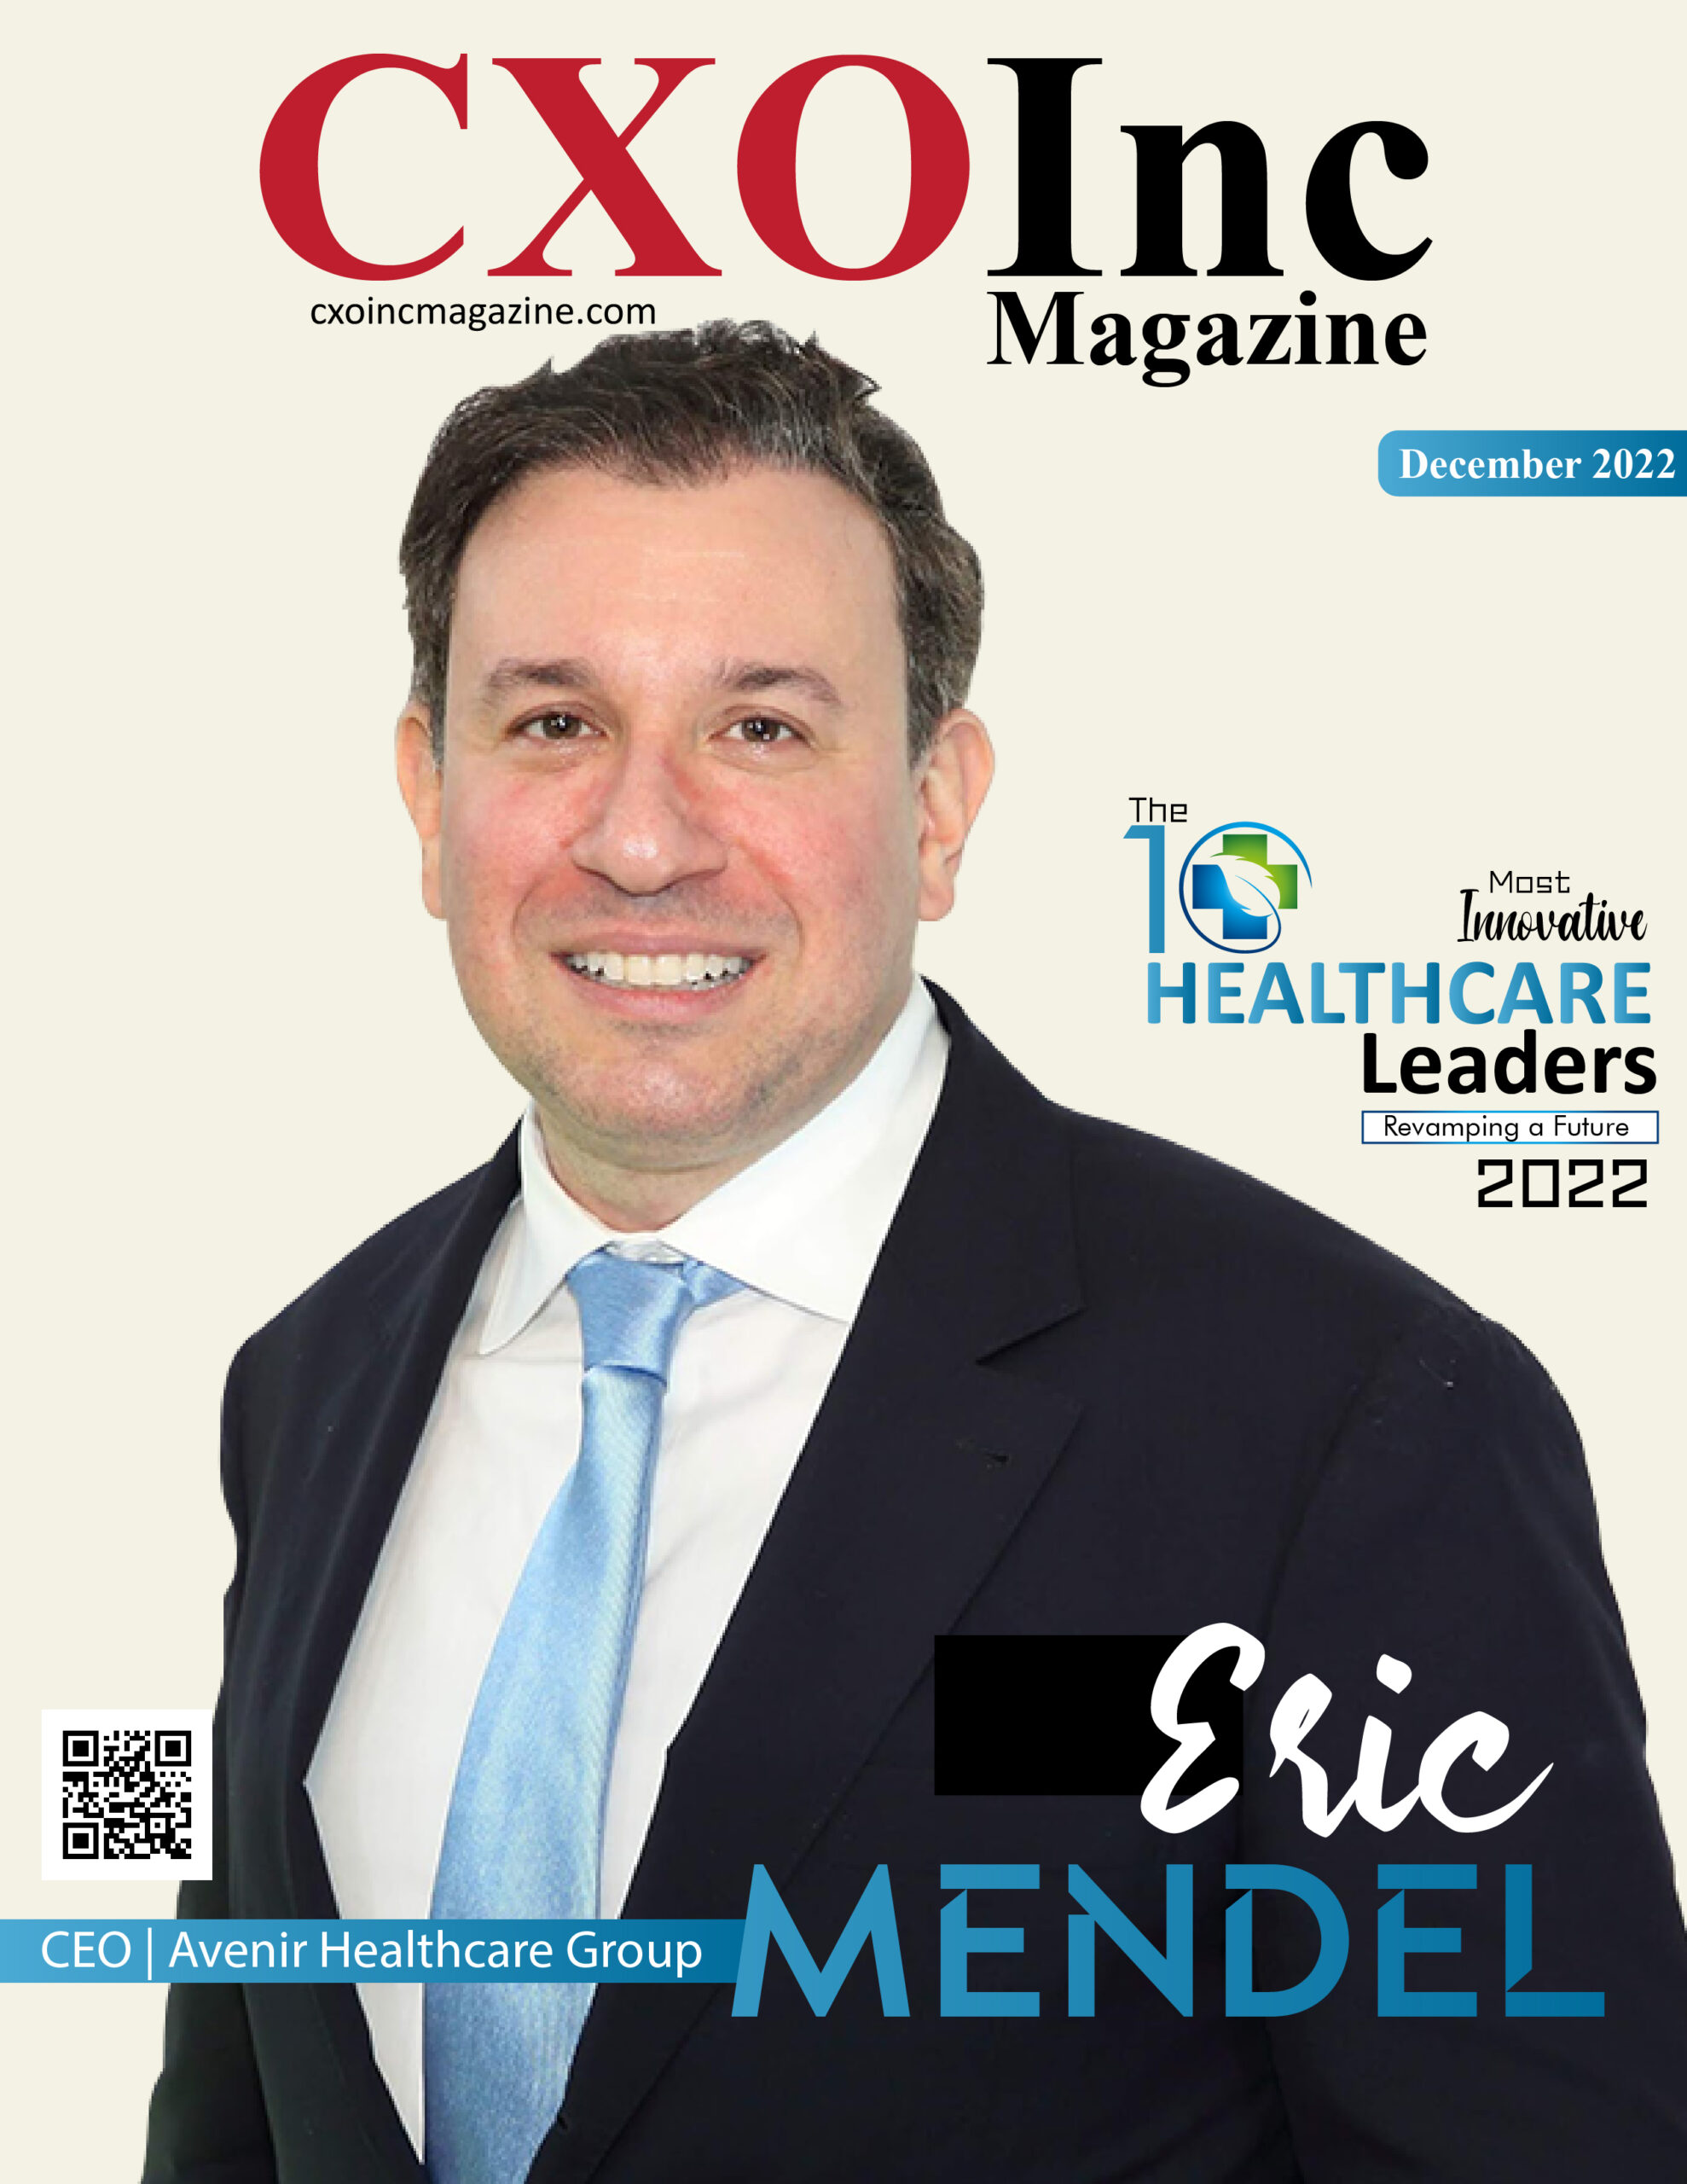 Cover Page - The 10 Most Innovative Healthcare Leaders Revamping A Future 2022 | Business Magazine | CXO Inc Magazine